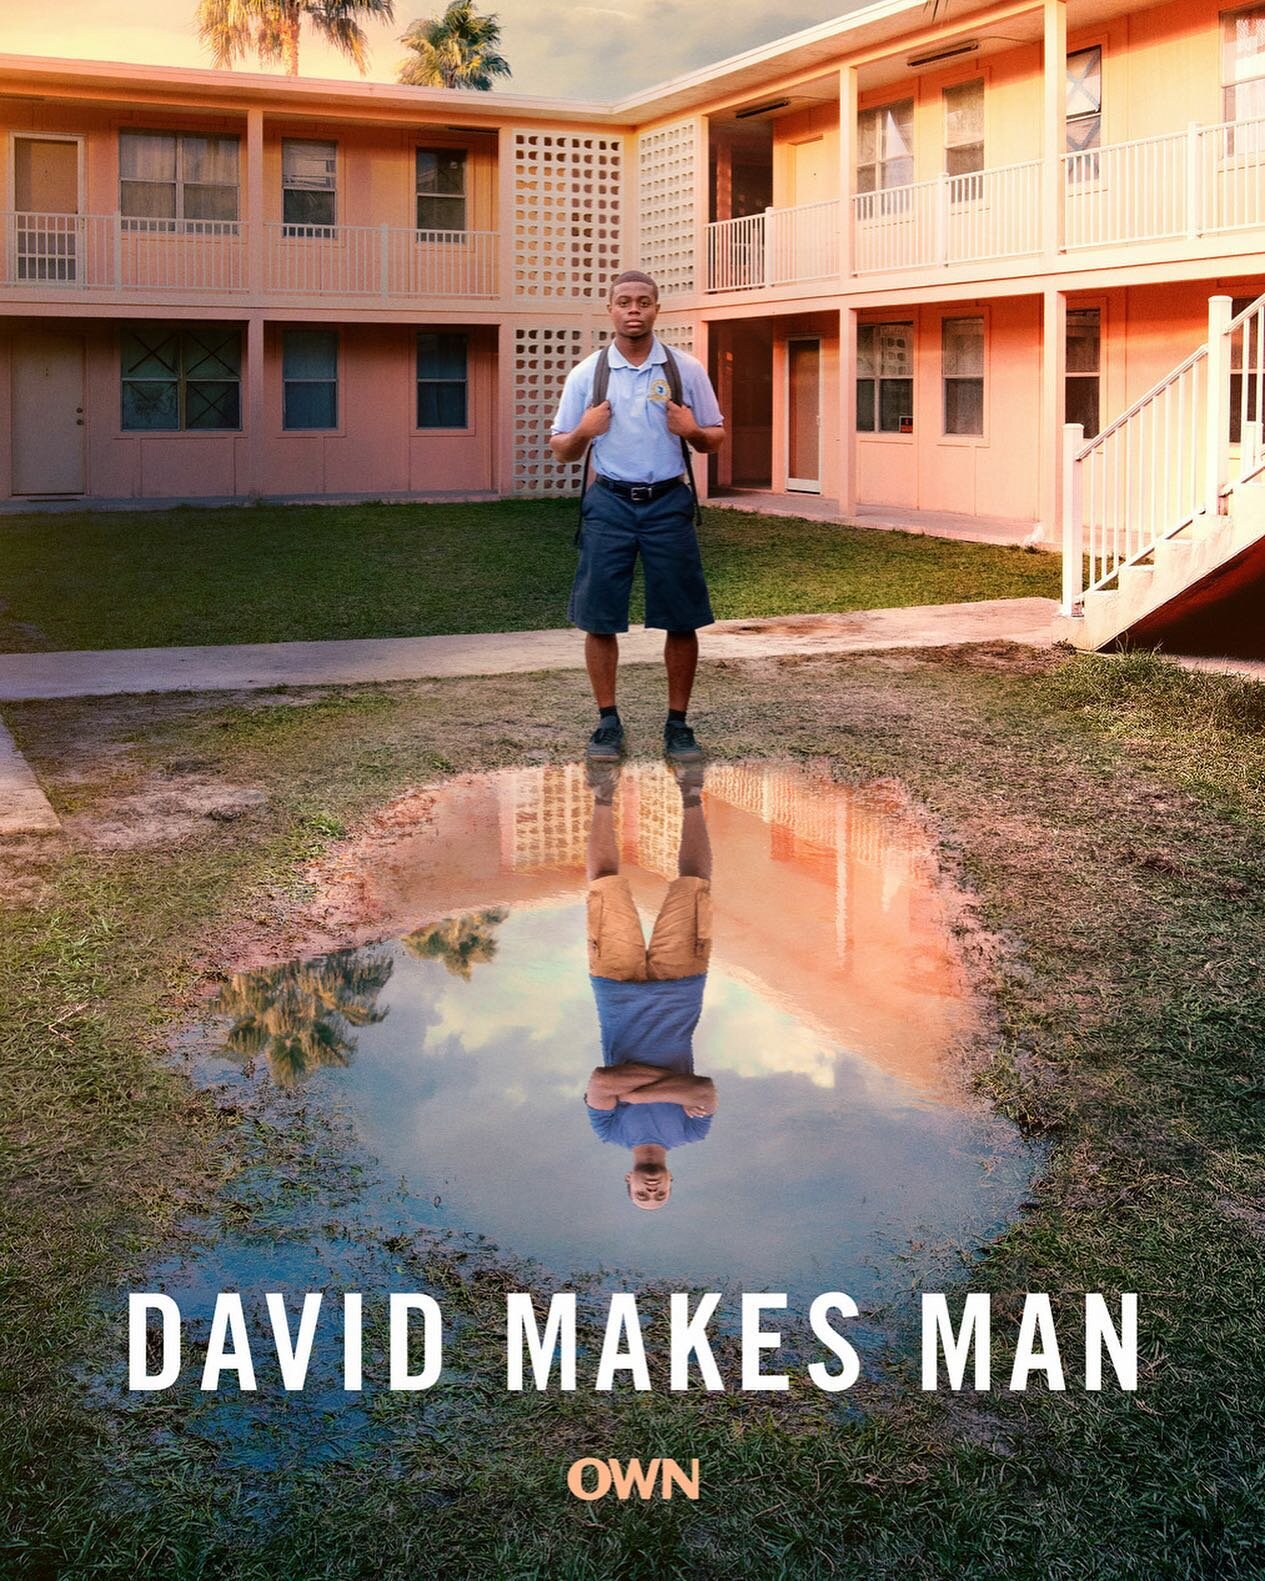 The award-winning TV drama David Makes Man, created by the academy-award winning screenwriter Tarell Alvin McCraney (&ldquo;Moonlight&rdquo;), has been renewed for a second season. David Makes Man won a Peabody Award, which honors powerful and enligh